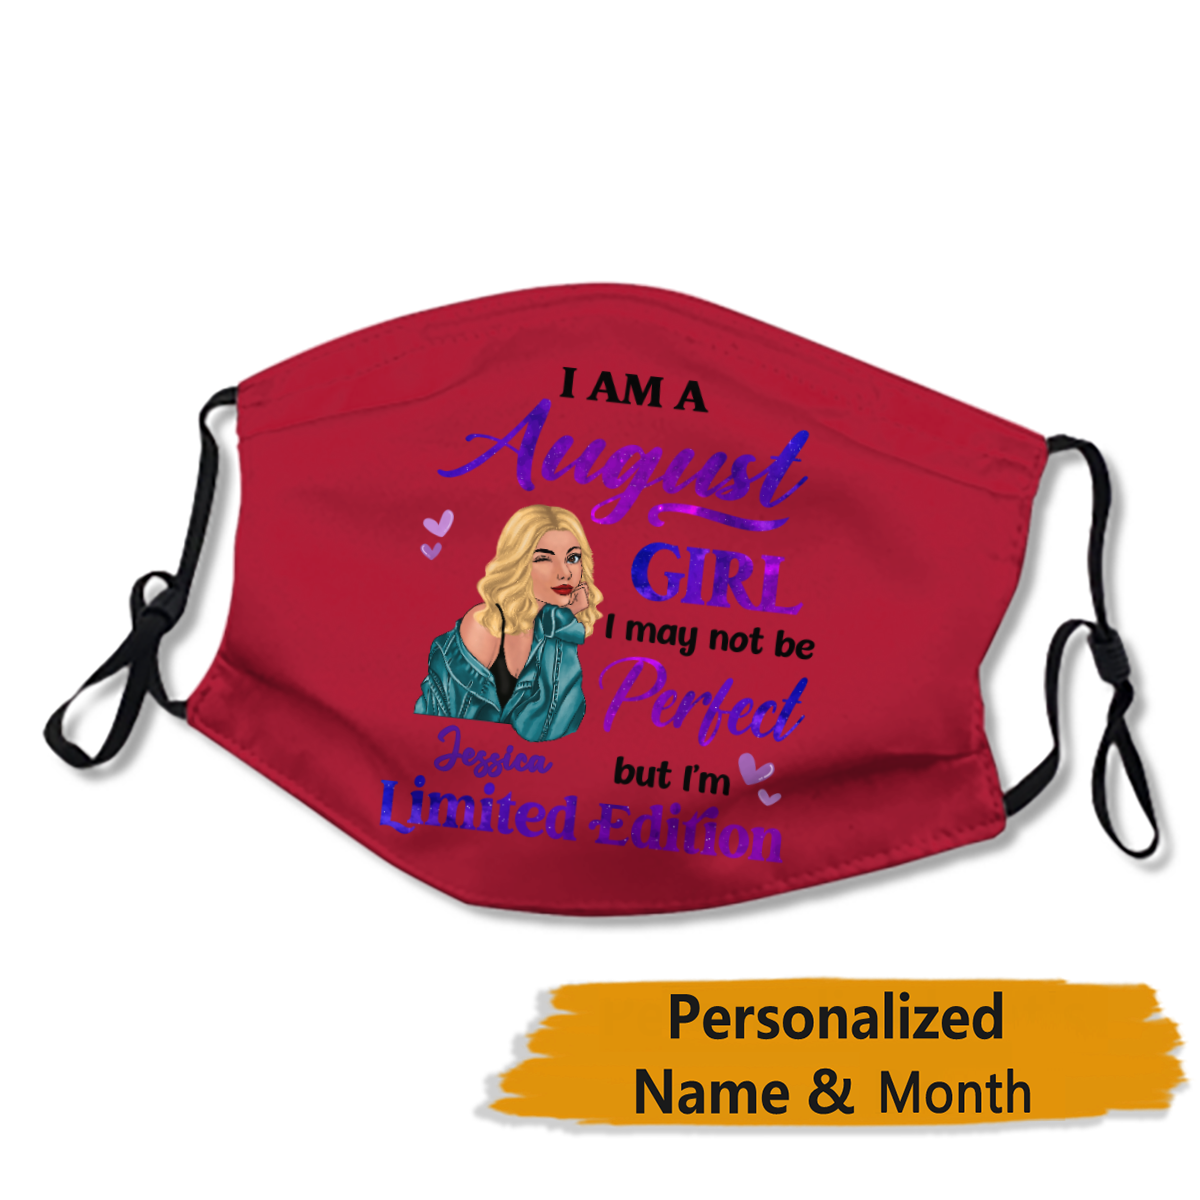 Birthday Gift Birth Month Fashion Girl Limited Edition Personalized Month & Name Face Mask